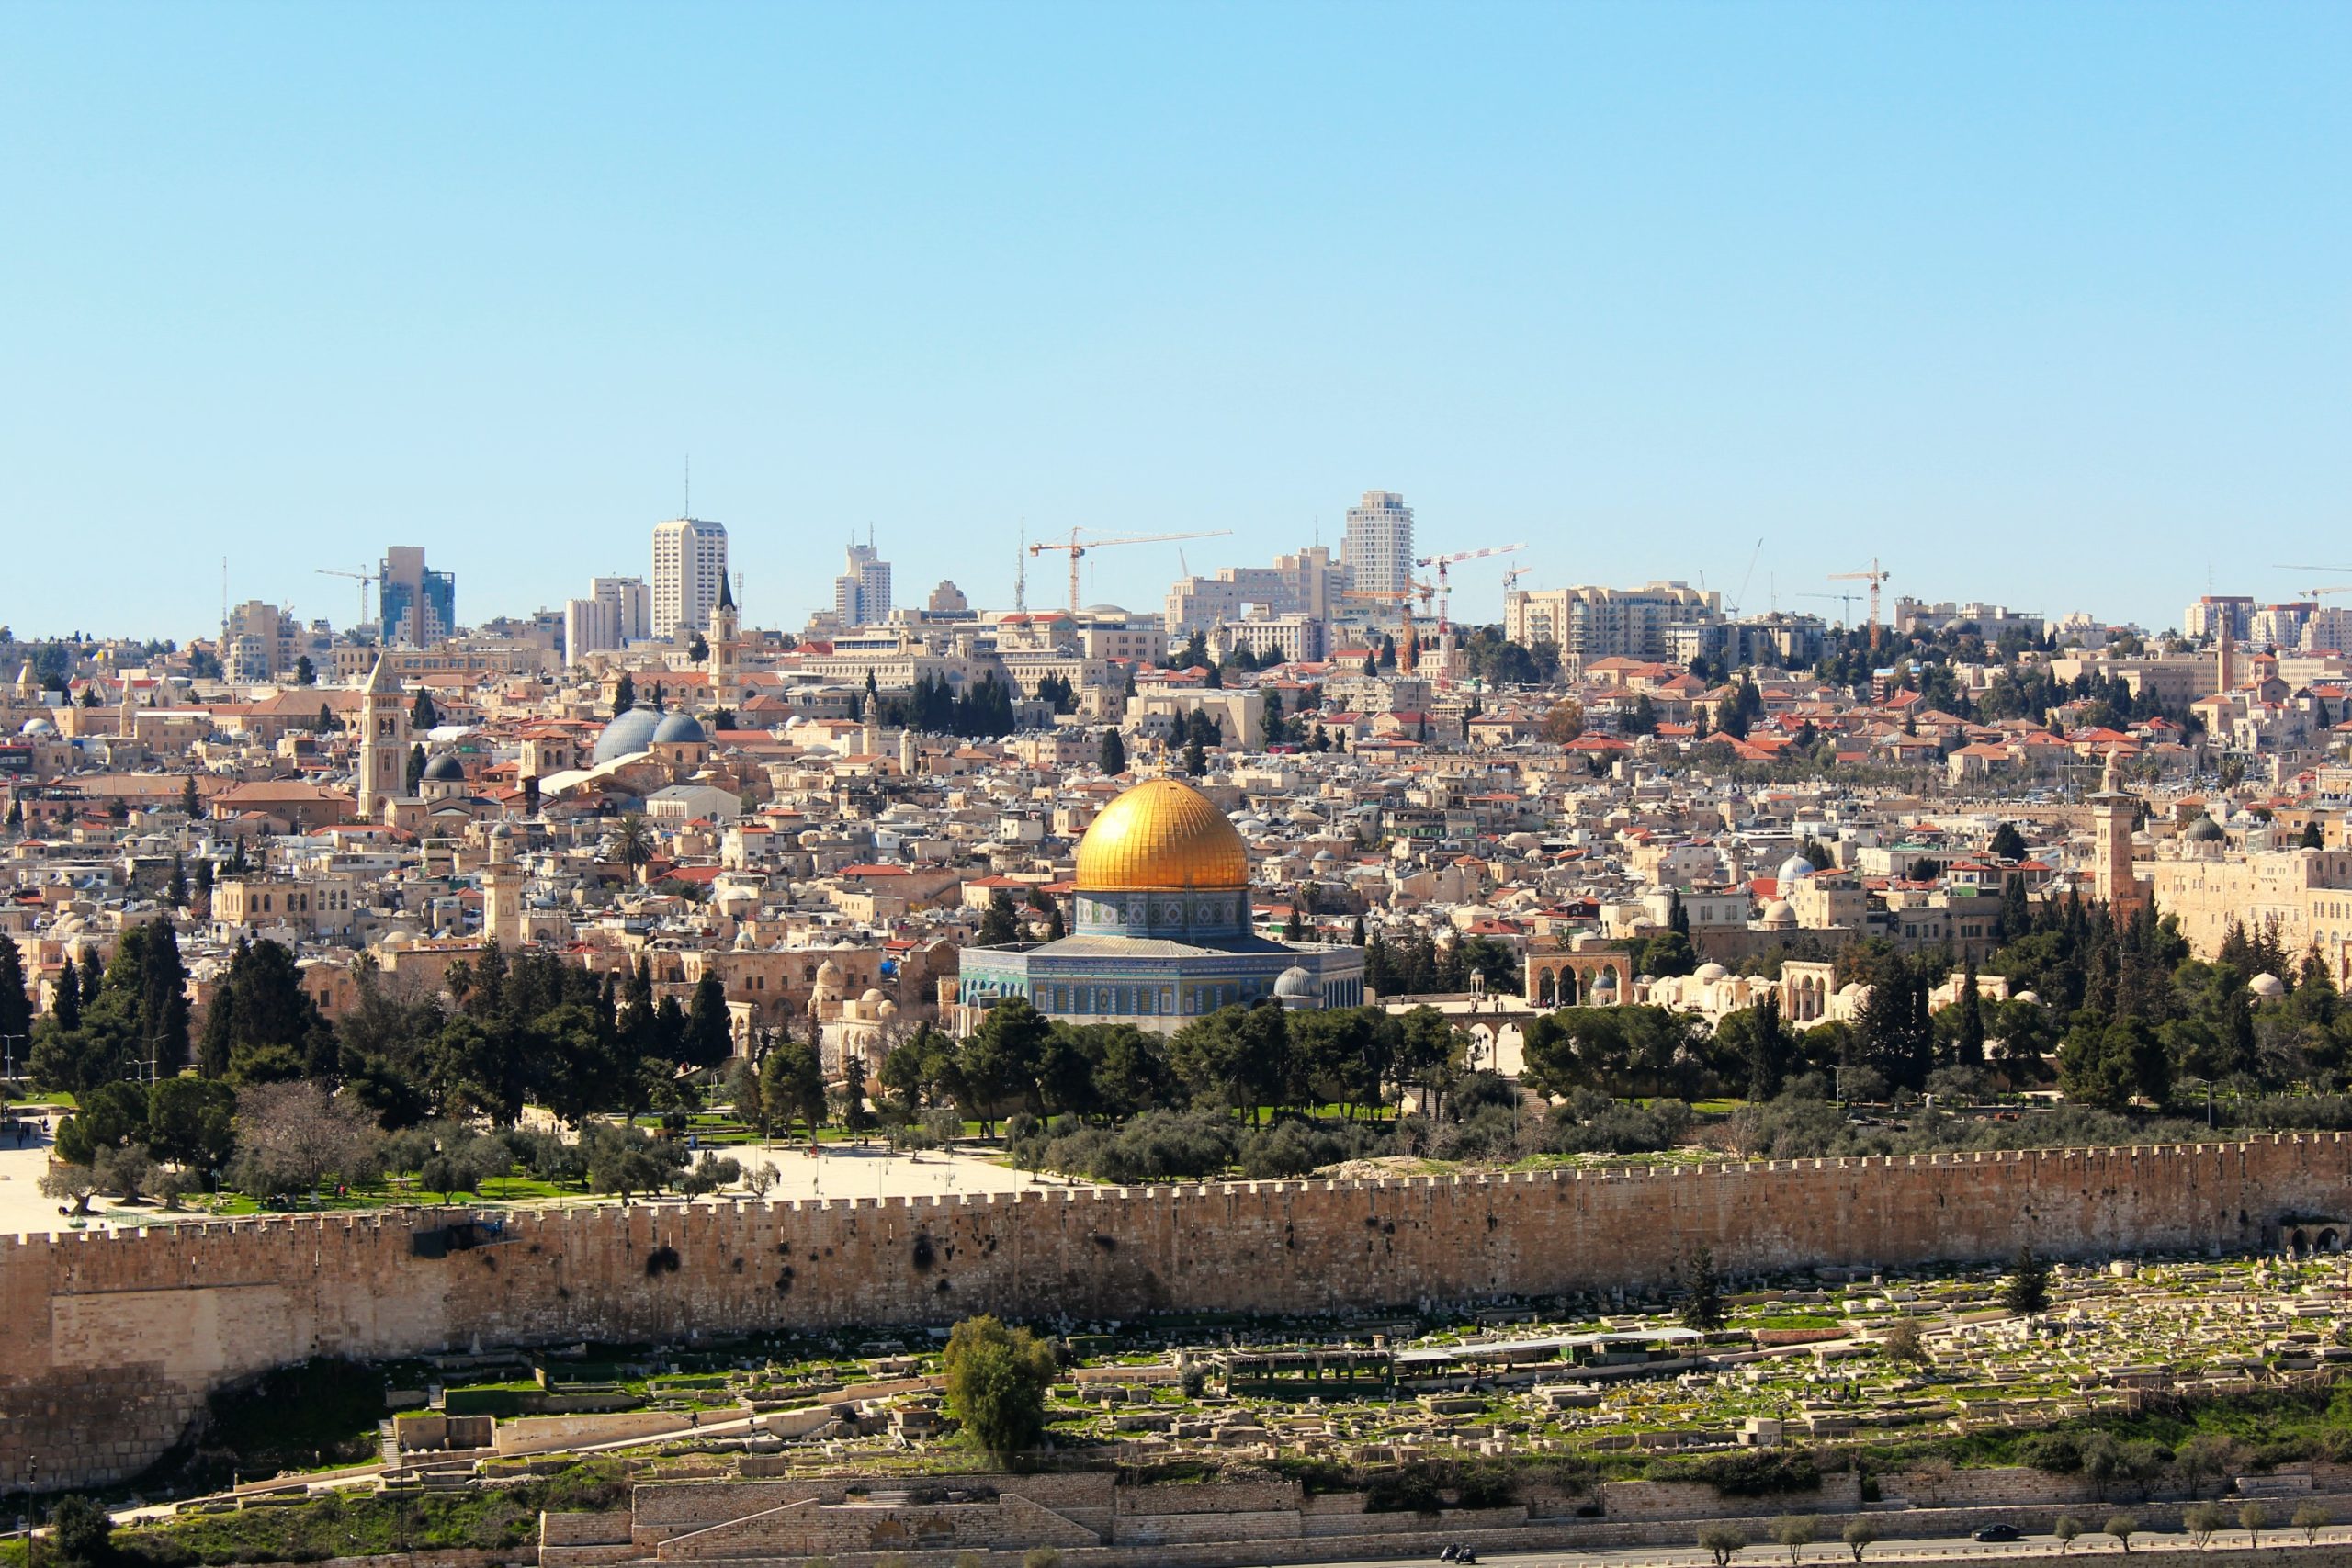 A long distance photo of Jerusalem. In the foreground is a cemetery. In the midground is the Dome of the Rock and the Old City. Beyond those structures are modern buildings and barely visible, due to distance, construction cranes.